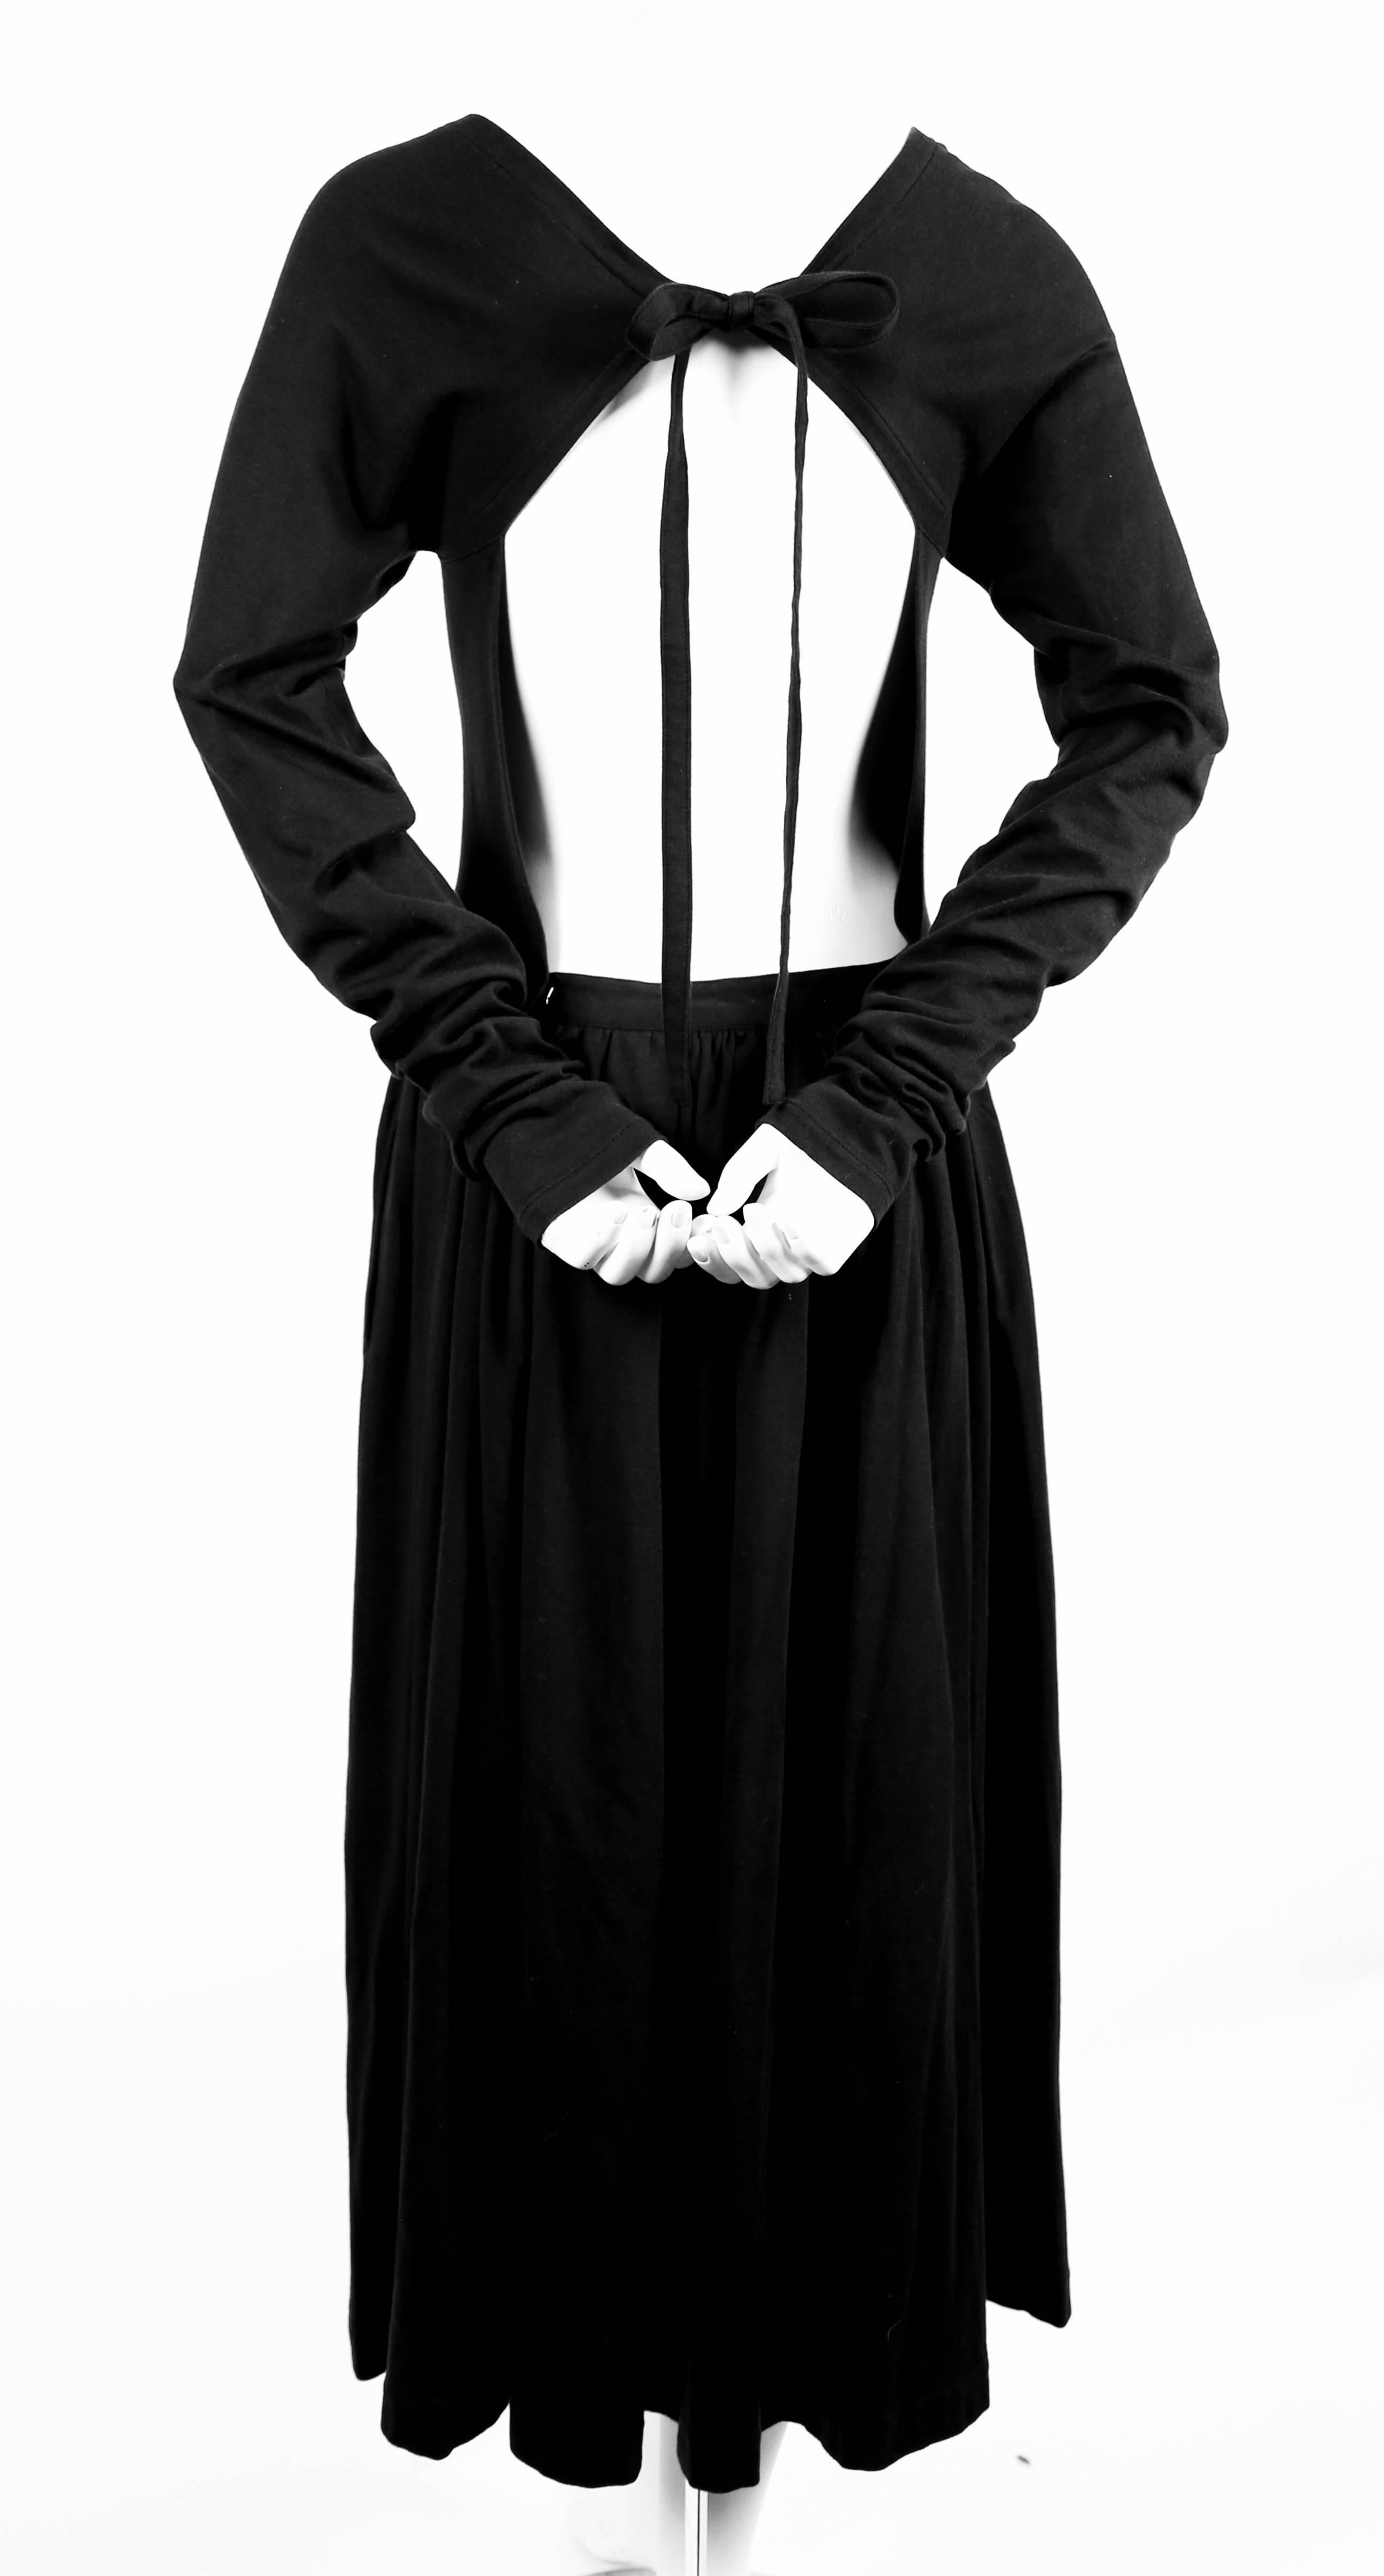 Black 1985 COMME DES GARCONS black runway dress with open back and exaggerated arms